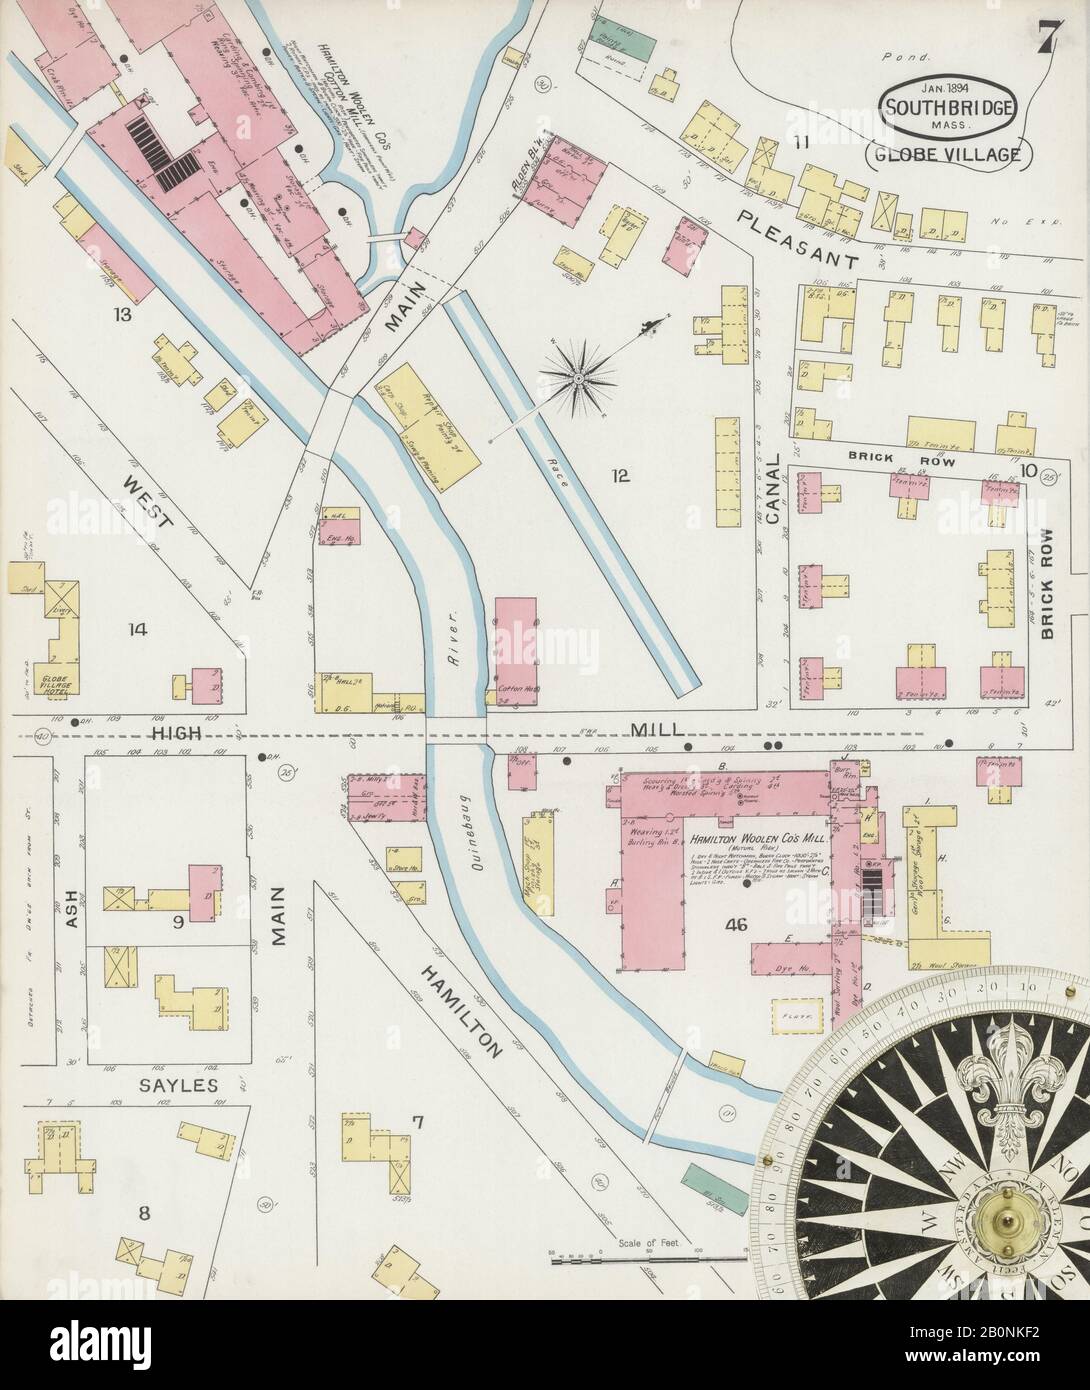 Image 7 of Sanborn Fire Insurance Map from Southbridge, Worcester County, Massachusetts. Jan 1894. 10 Sheet(s). Includes Globe Village, Sturbridge, Fiskdale, America, street map with a Nineteenth Century compass Stock Photo